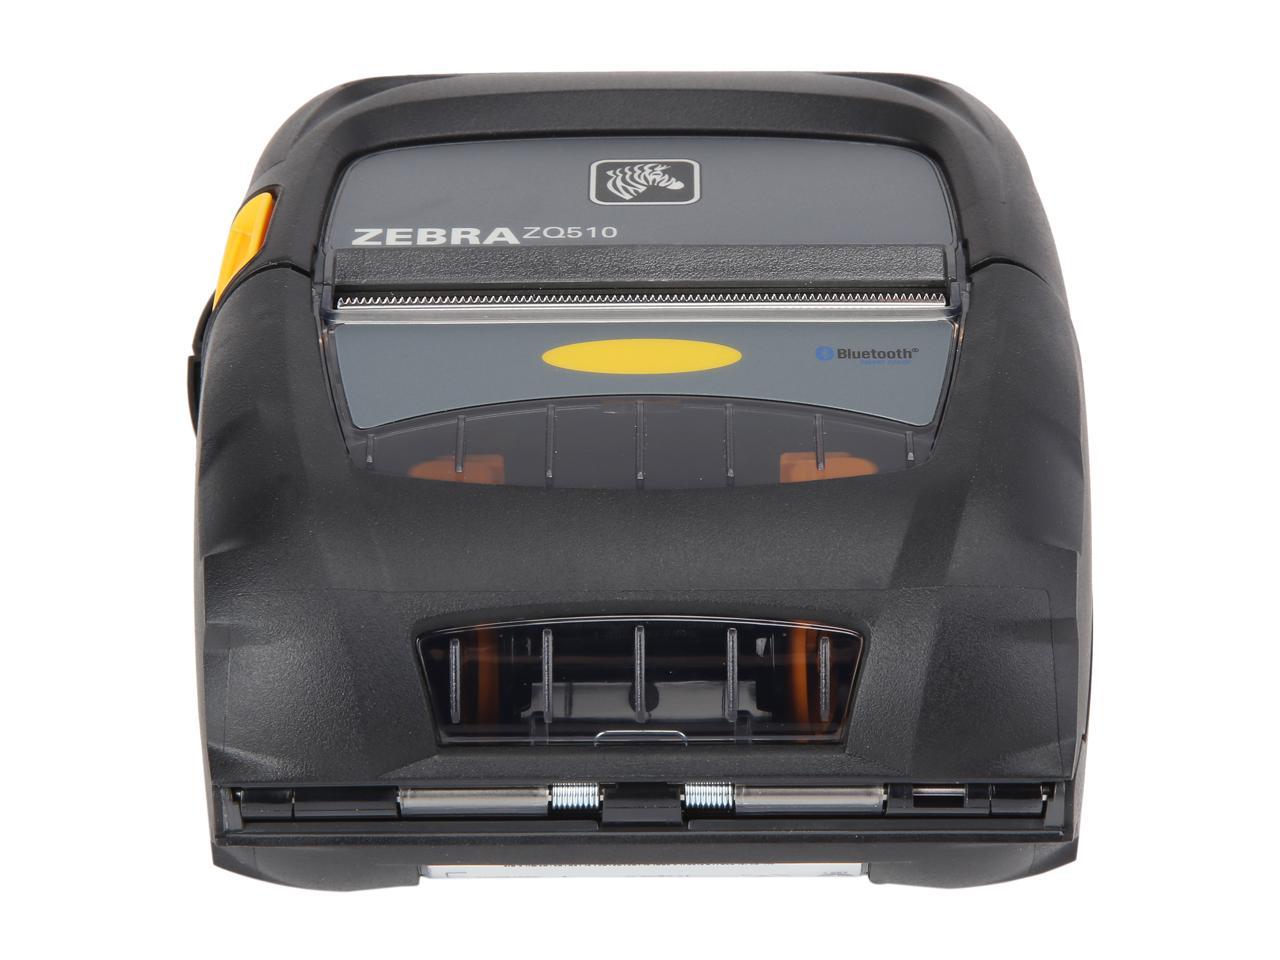 Zebra Zq510 3 Mobile Direct Thermal Receipt And Label Printer 203 Dpi Bluetooth 40 Linered 5706